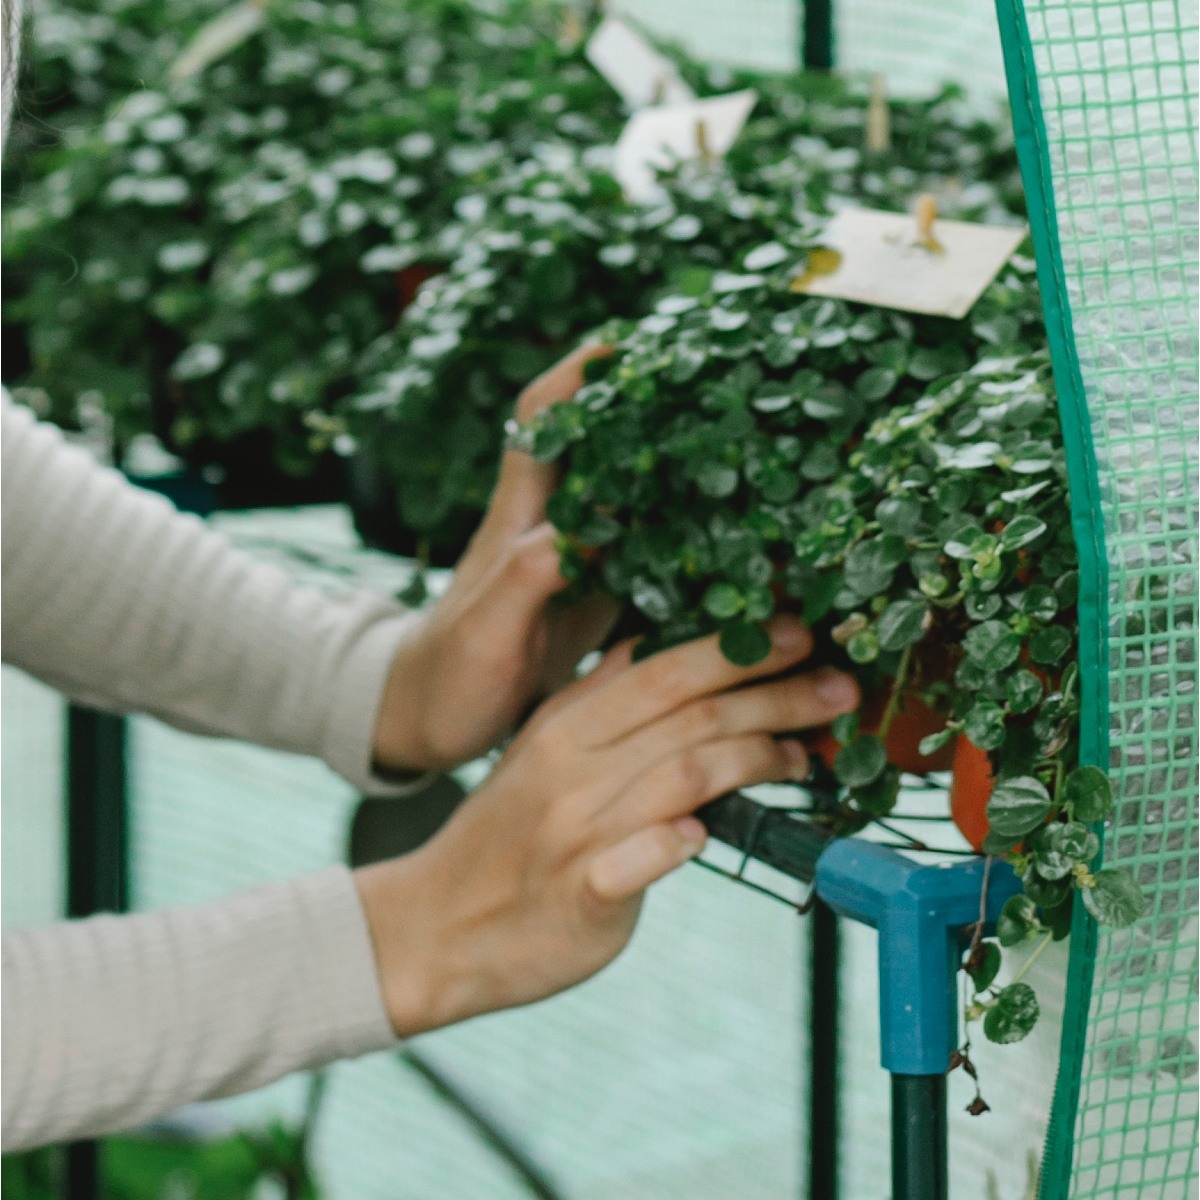 Tending a plant in a greenhouse